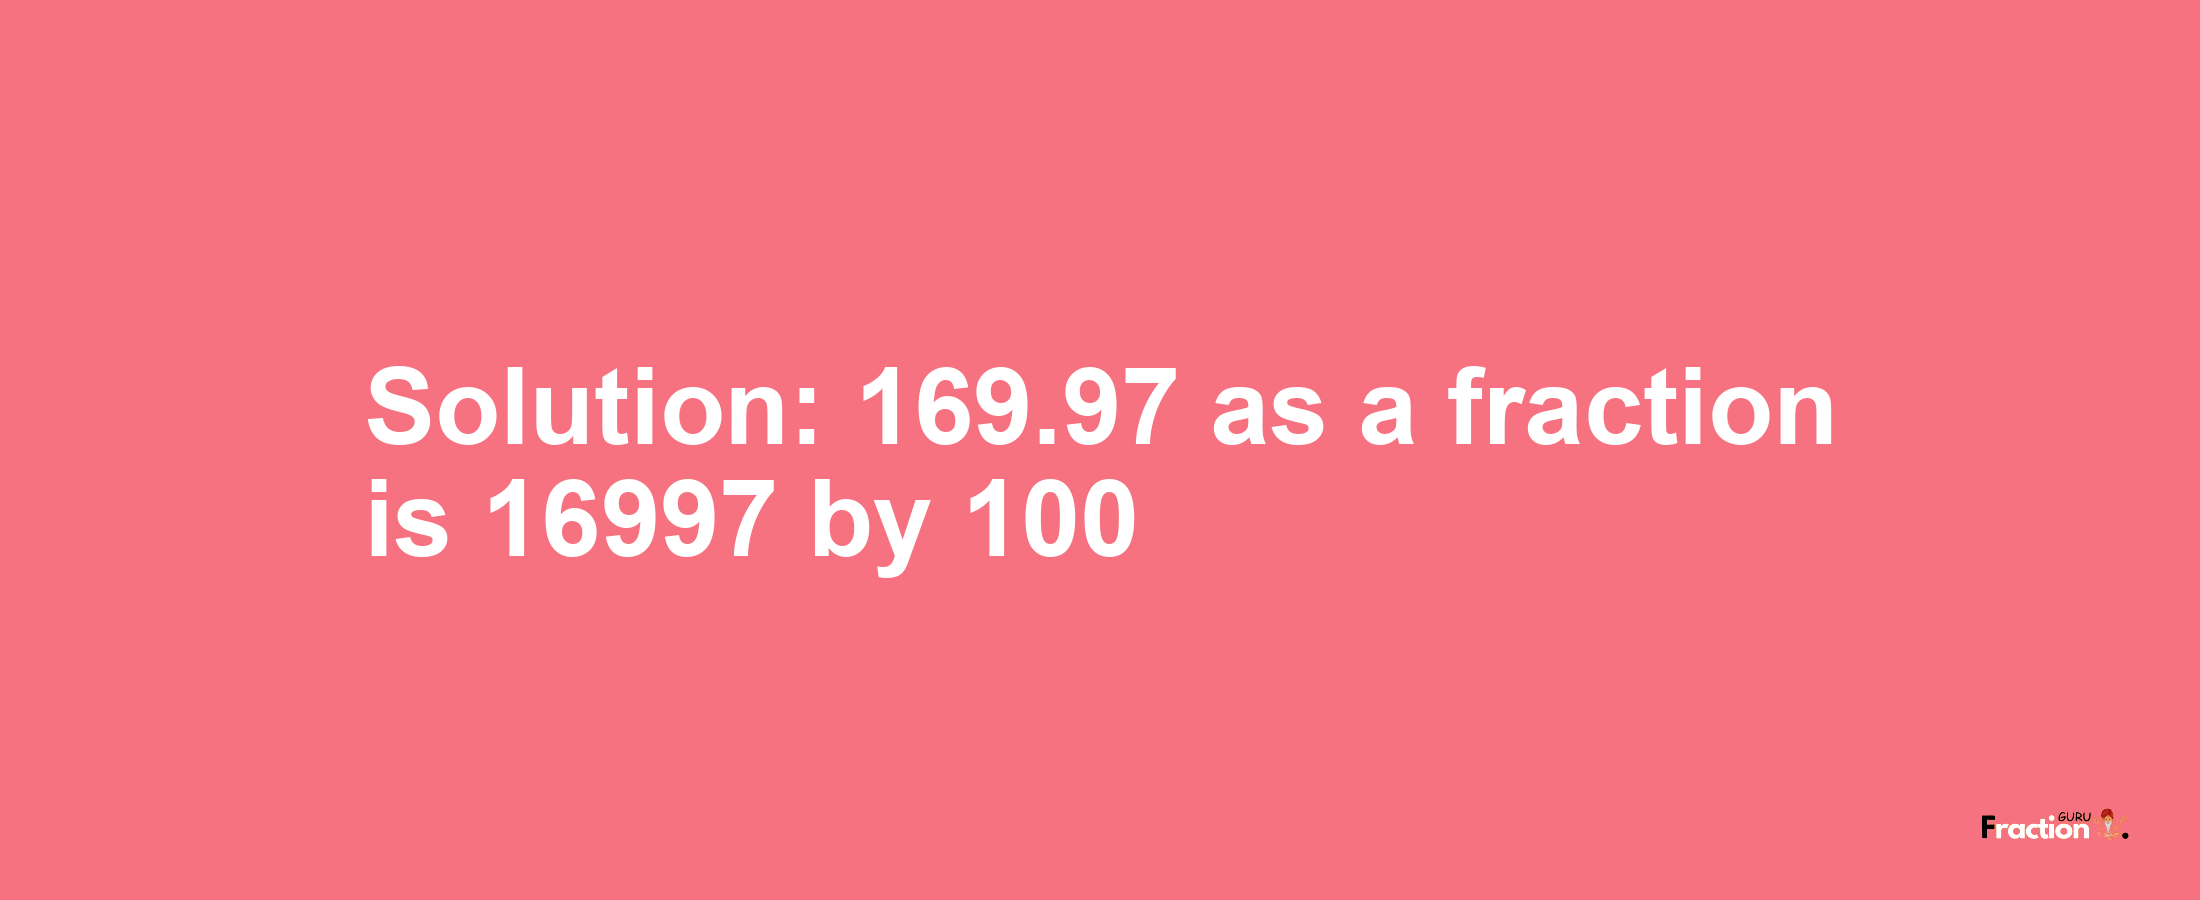 Solution:169.97 as a fraction is 16997/100